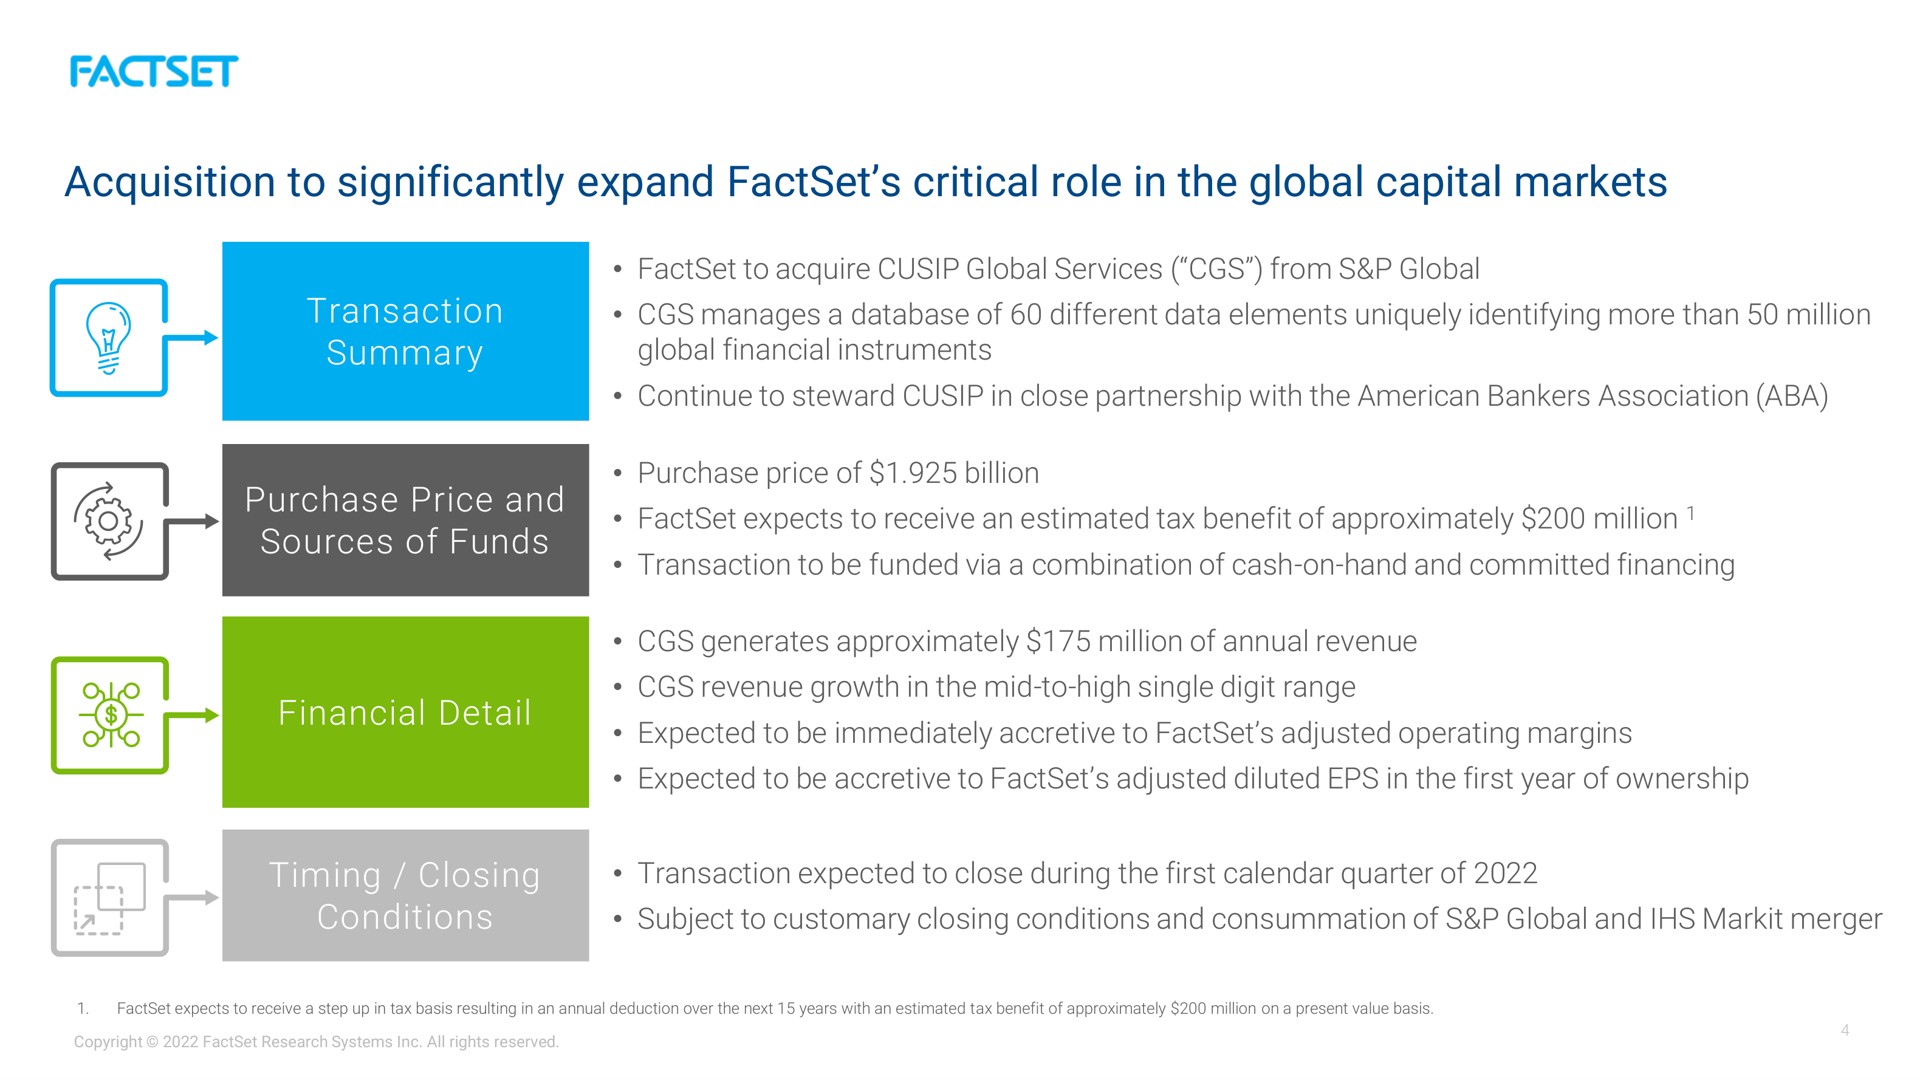 acquisition to significantly expand critical role in the global capital markets | Factset